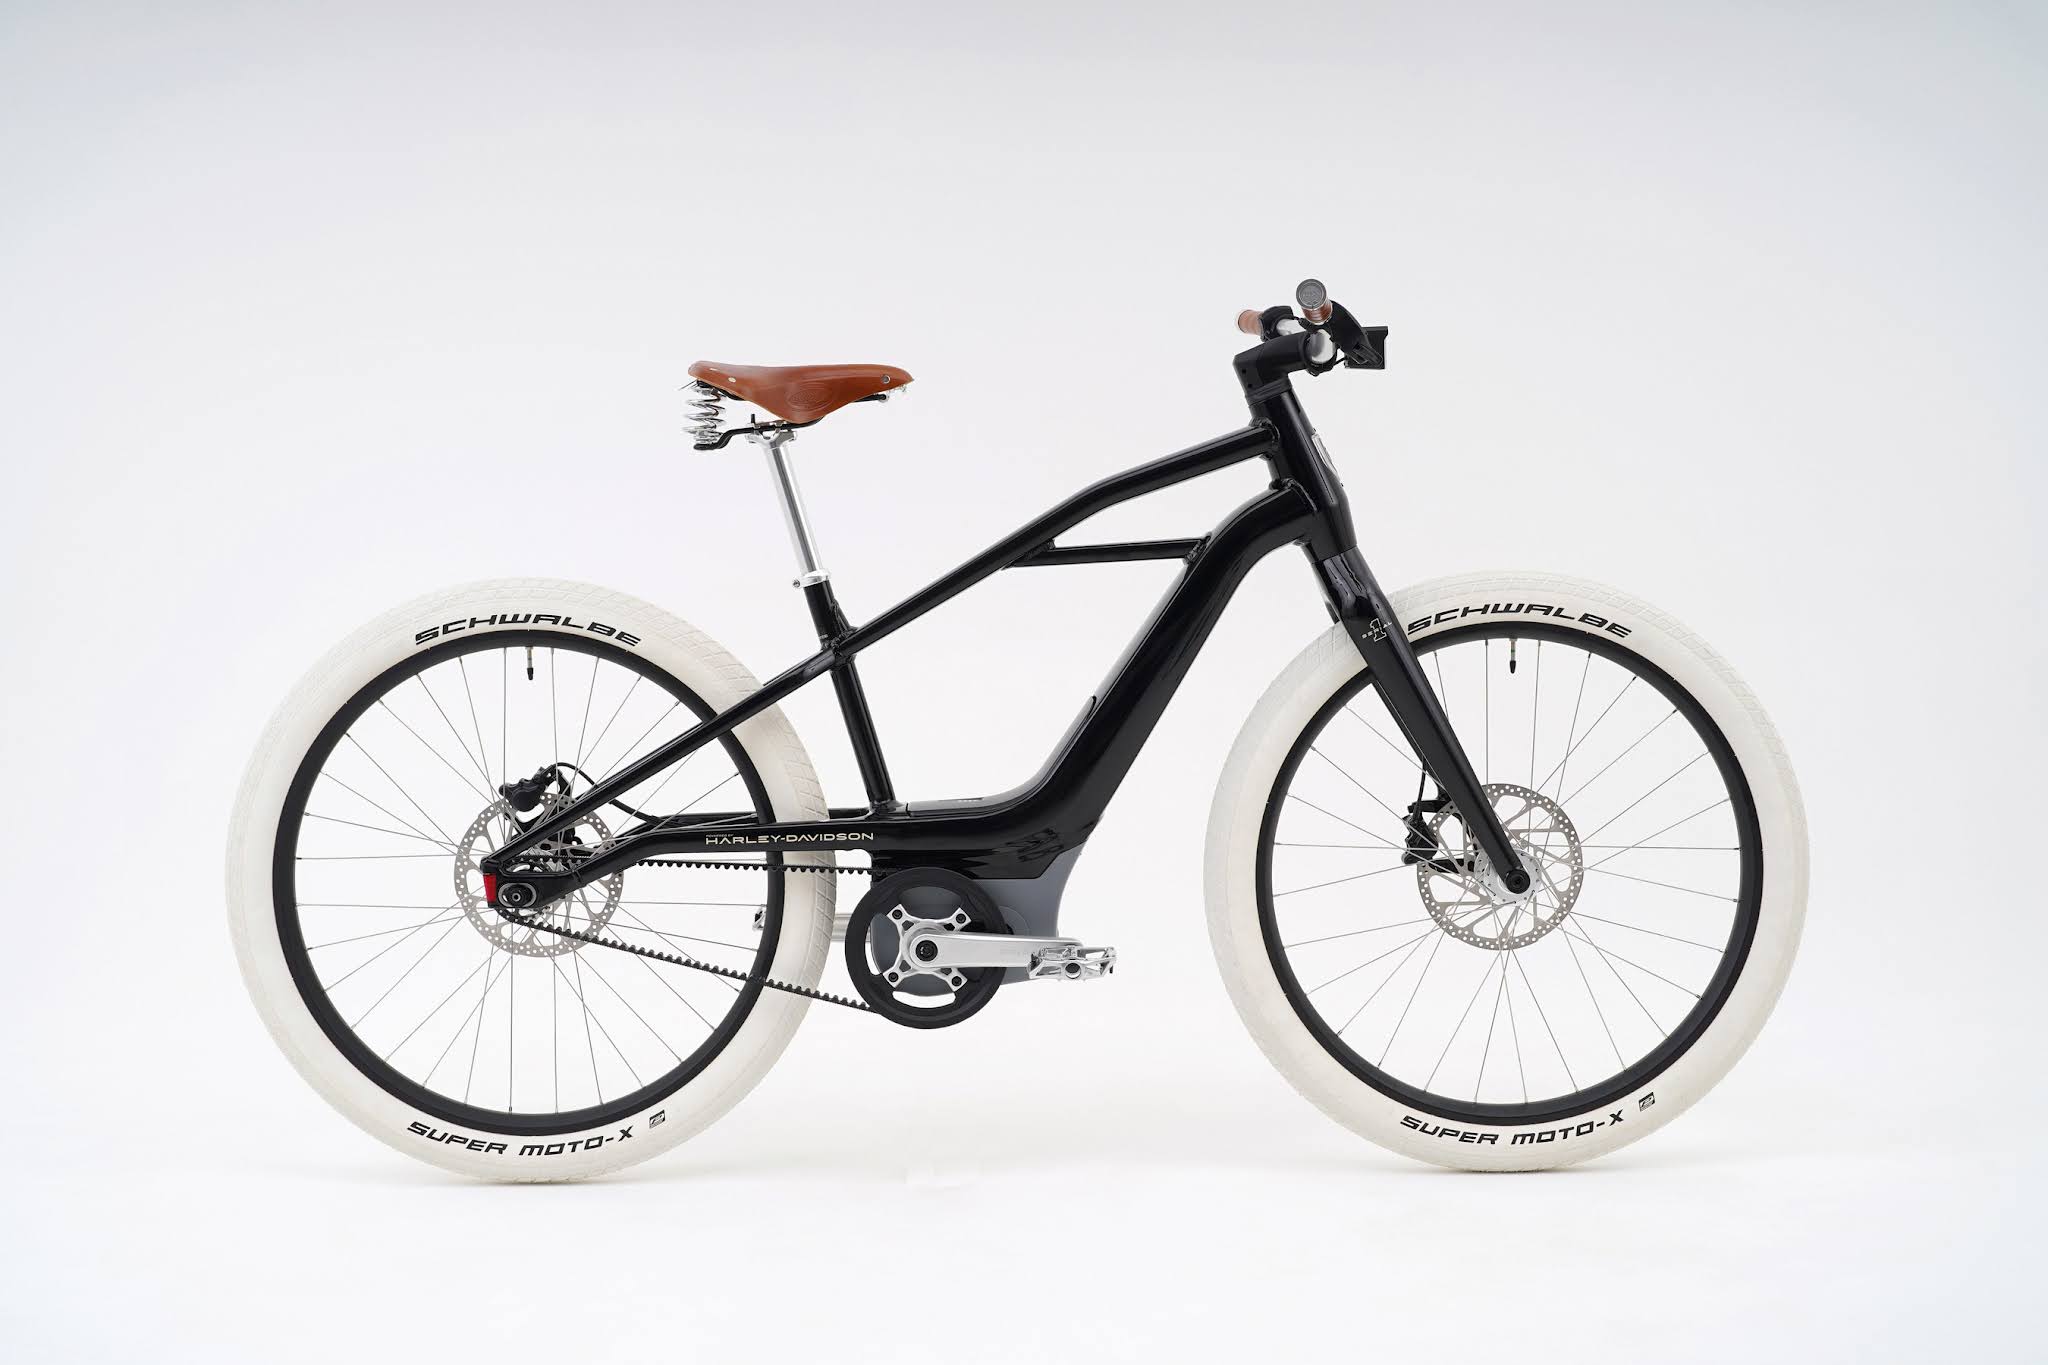 Serial 1 Debuts Limited-edition MOSH/TRIBUTE eBike, First in S1 series